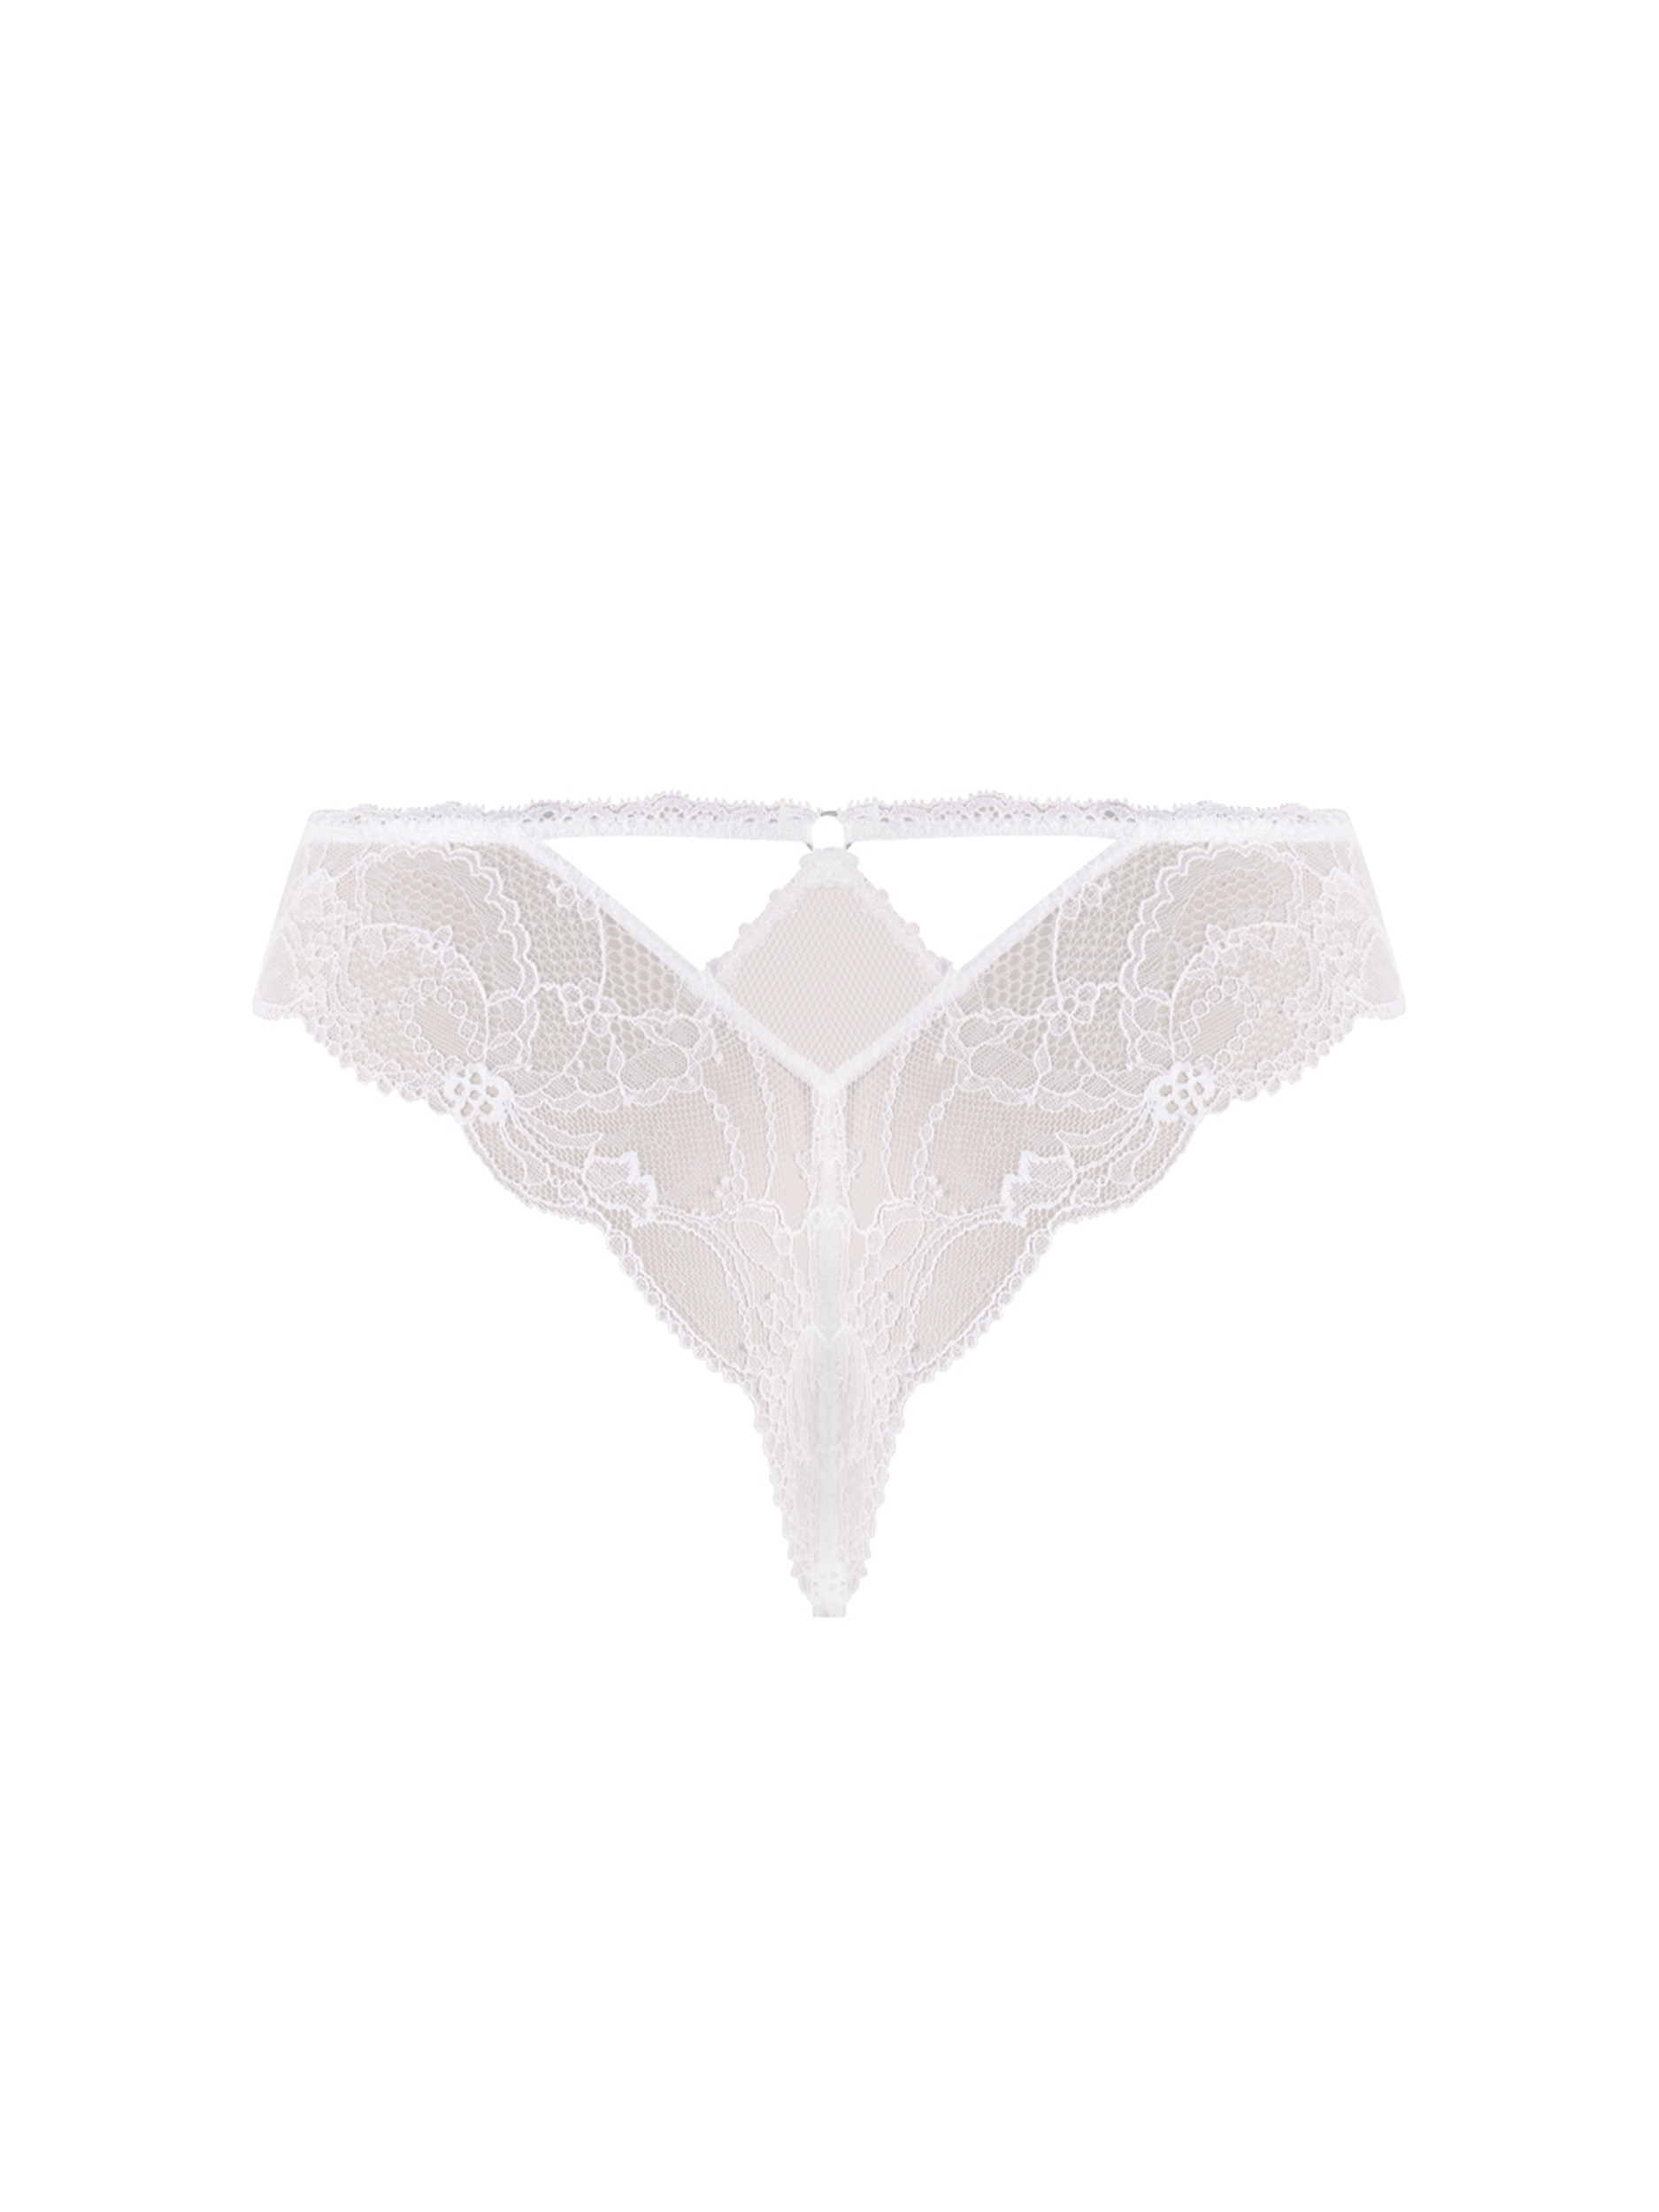 Lise Charmel Feerie Couture String